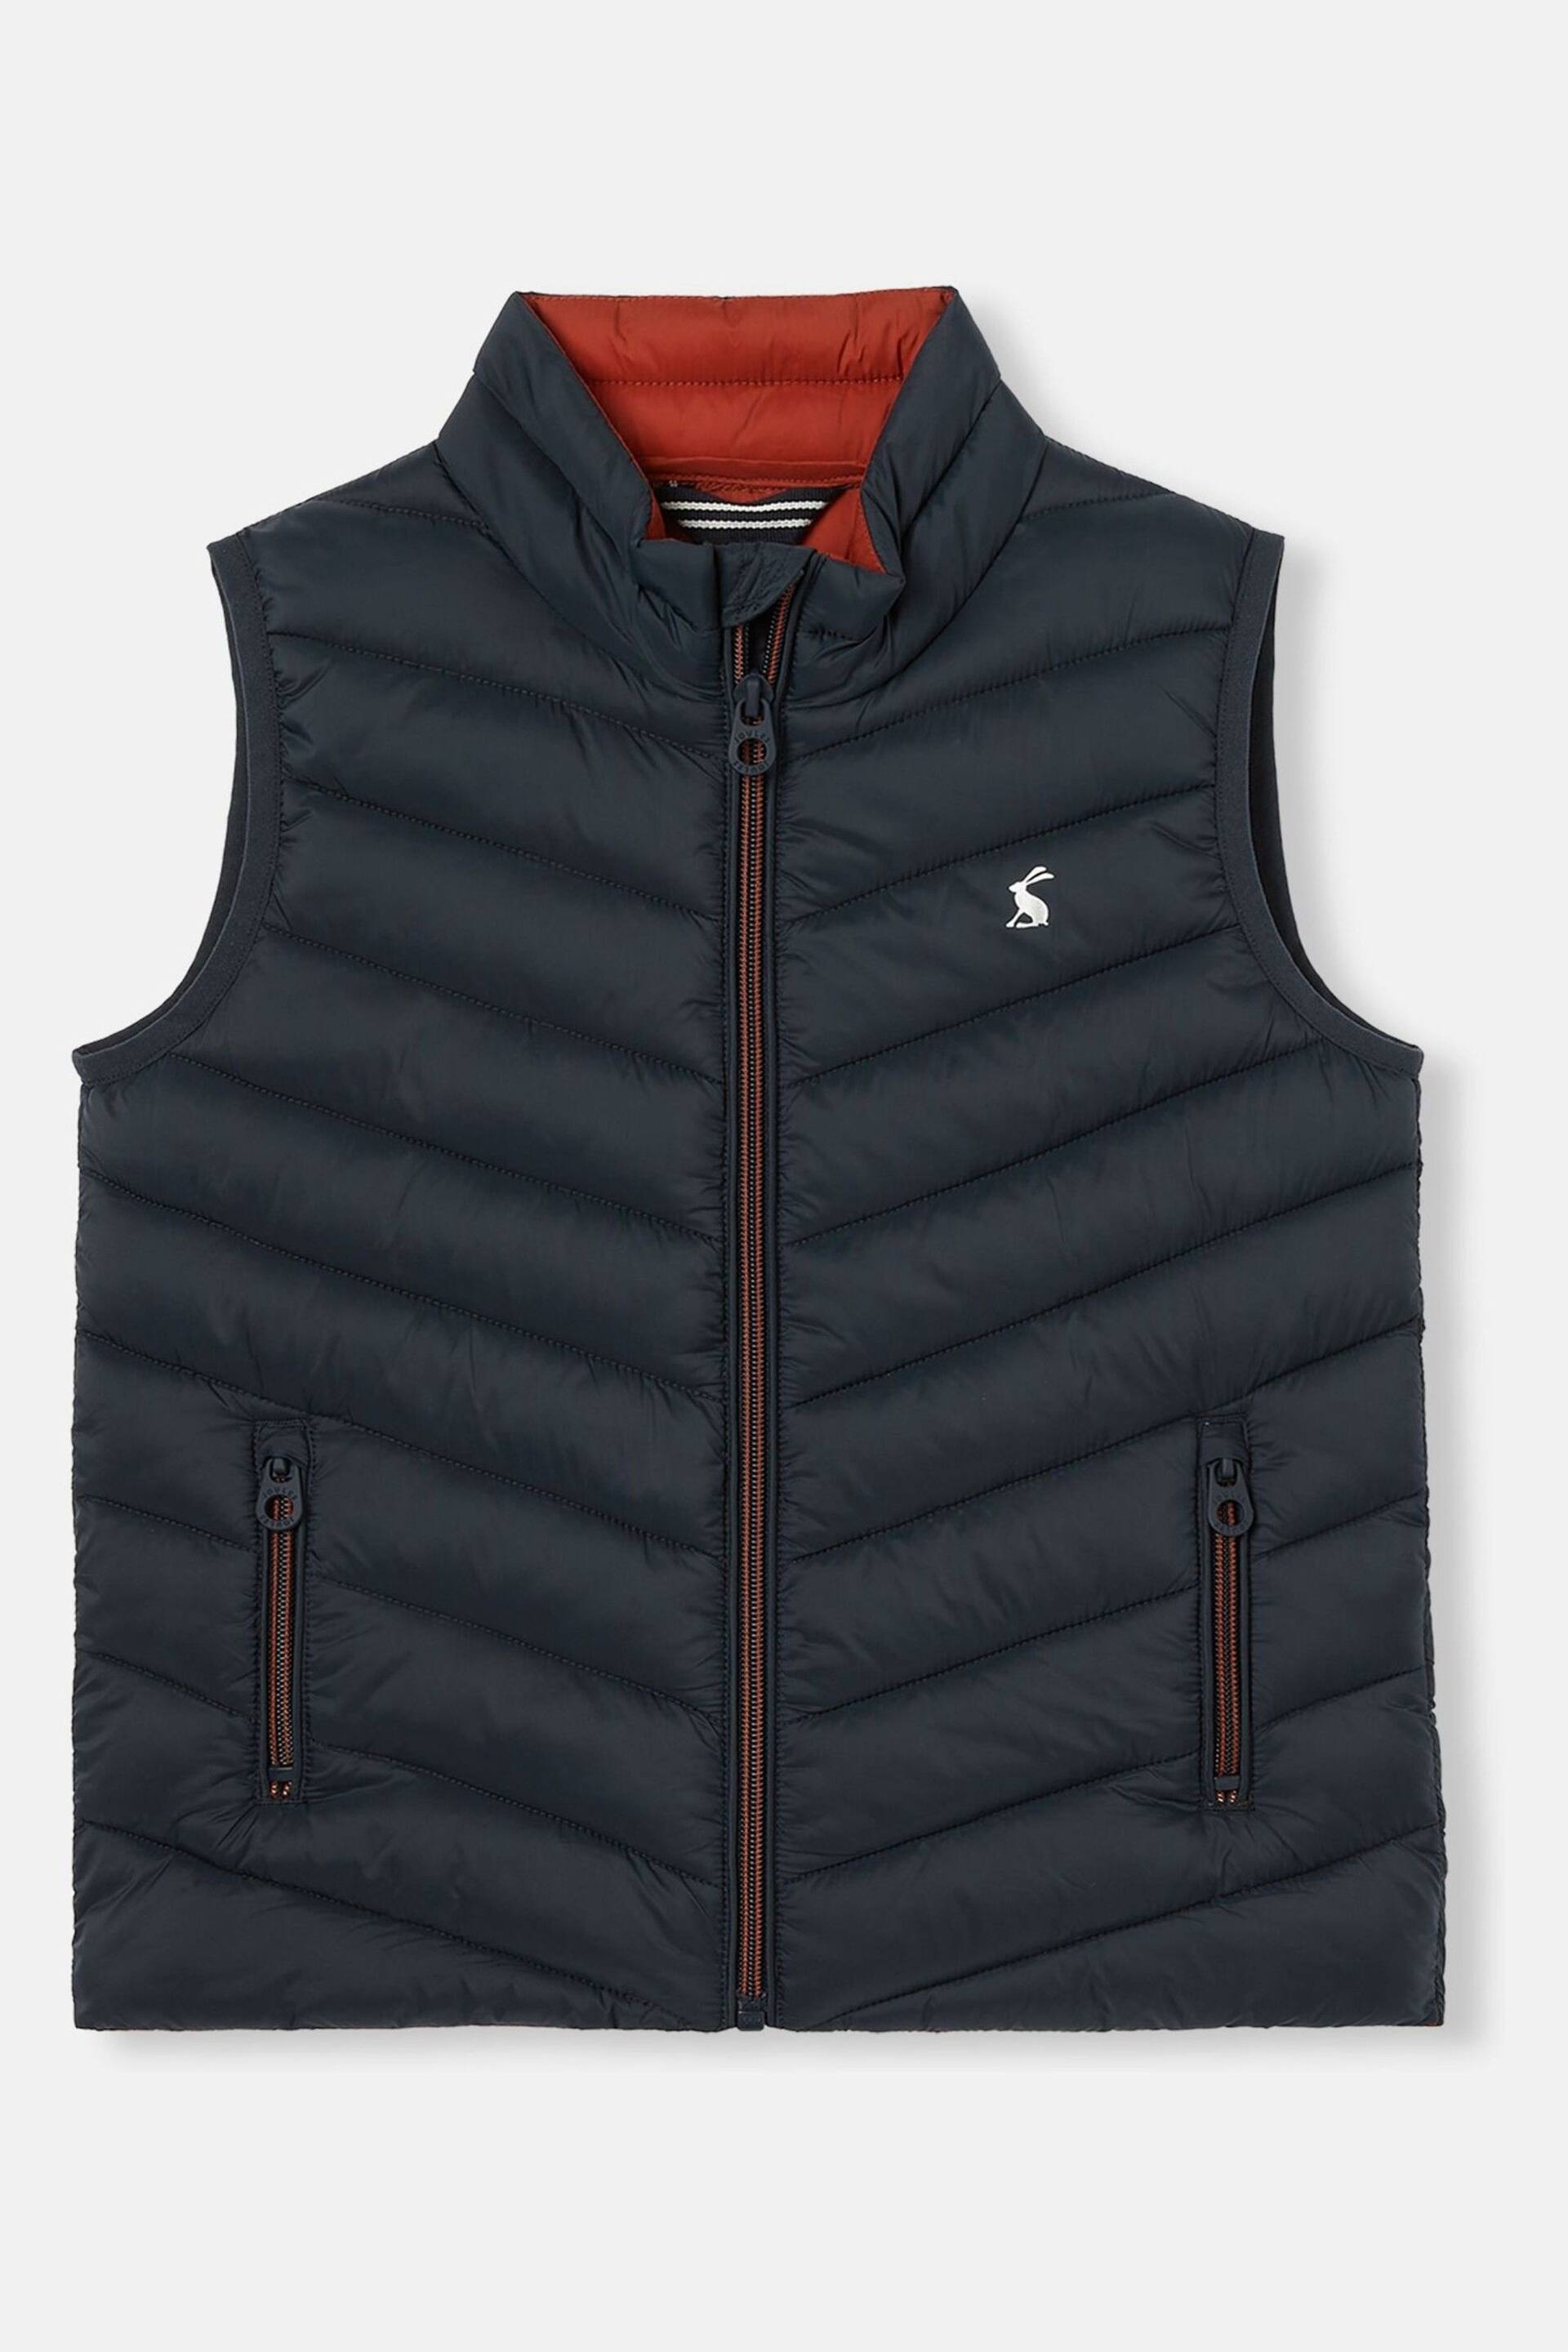 Joules Crofton Navy Blue Packable Padded Gilet - Image 1 of 6